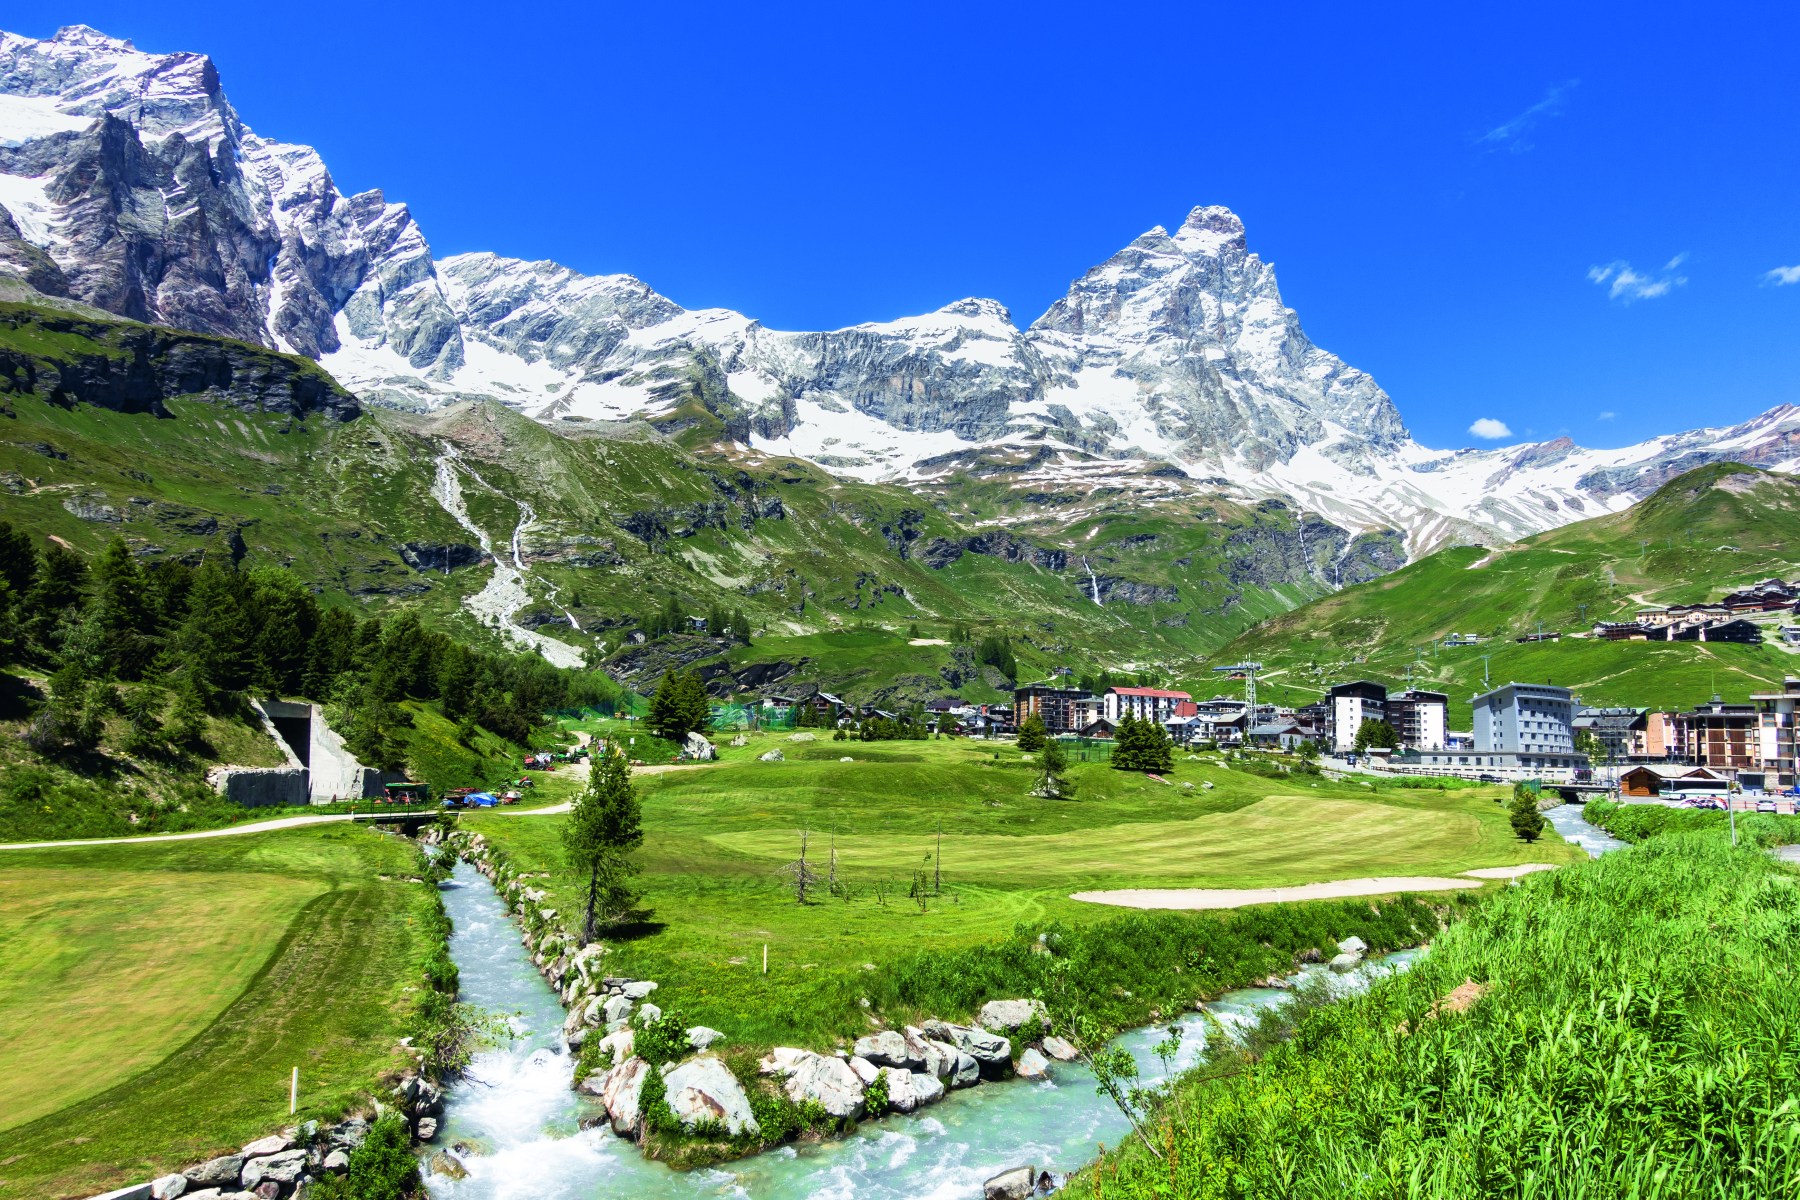 <strong>CERVINO GOLF CLUB</strong>, Italy. The iconic Matterhorn watches your every swing at this Alpine course.<br><br>Waldek says: “Italy's Cervino Golf Club is at an elevation of more than 6,700 feet, set in the shadow of the Matterhorn (known as Cervino in Italy). Keep an eye out for marmots as you play and try not to channel your inner Bill Murray à la <em>Caddyshack</em>.”<br>